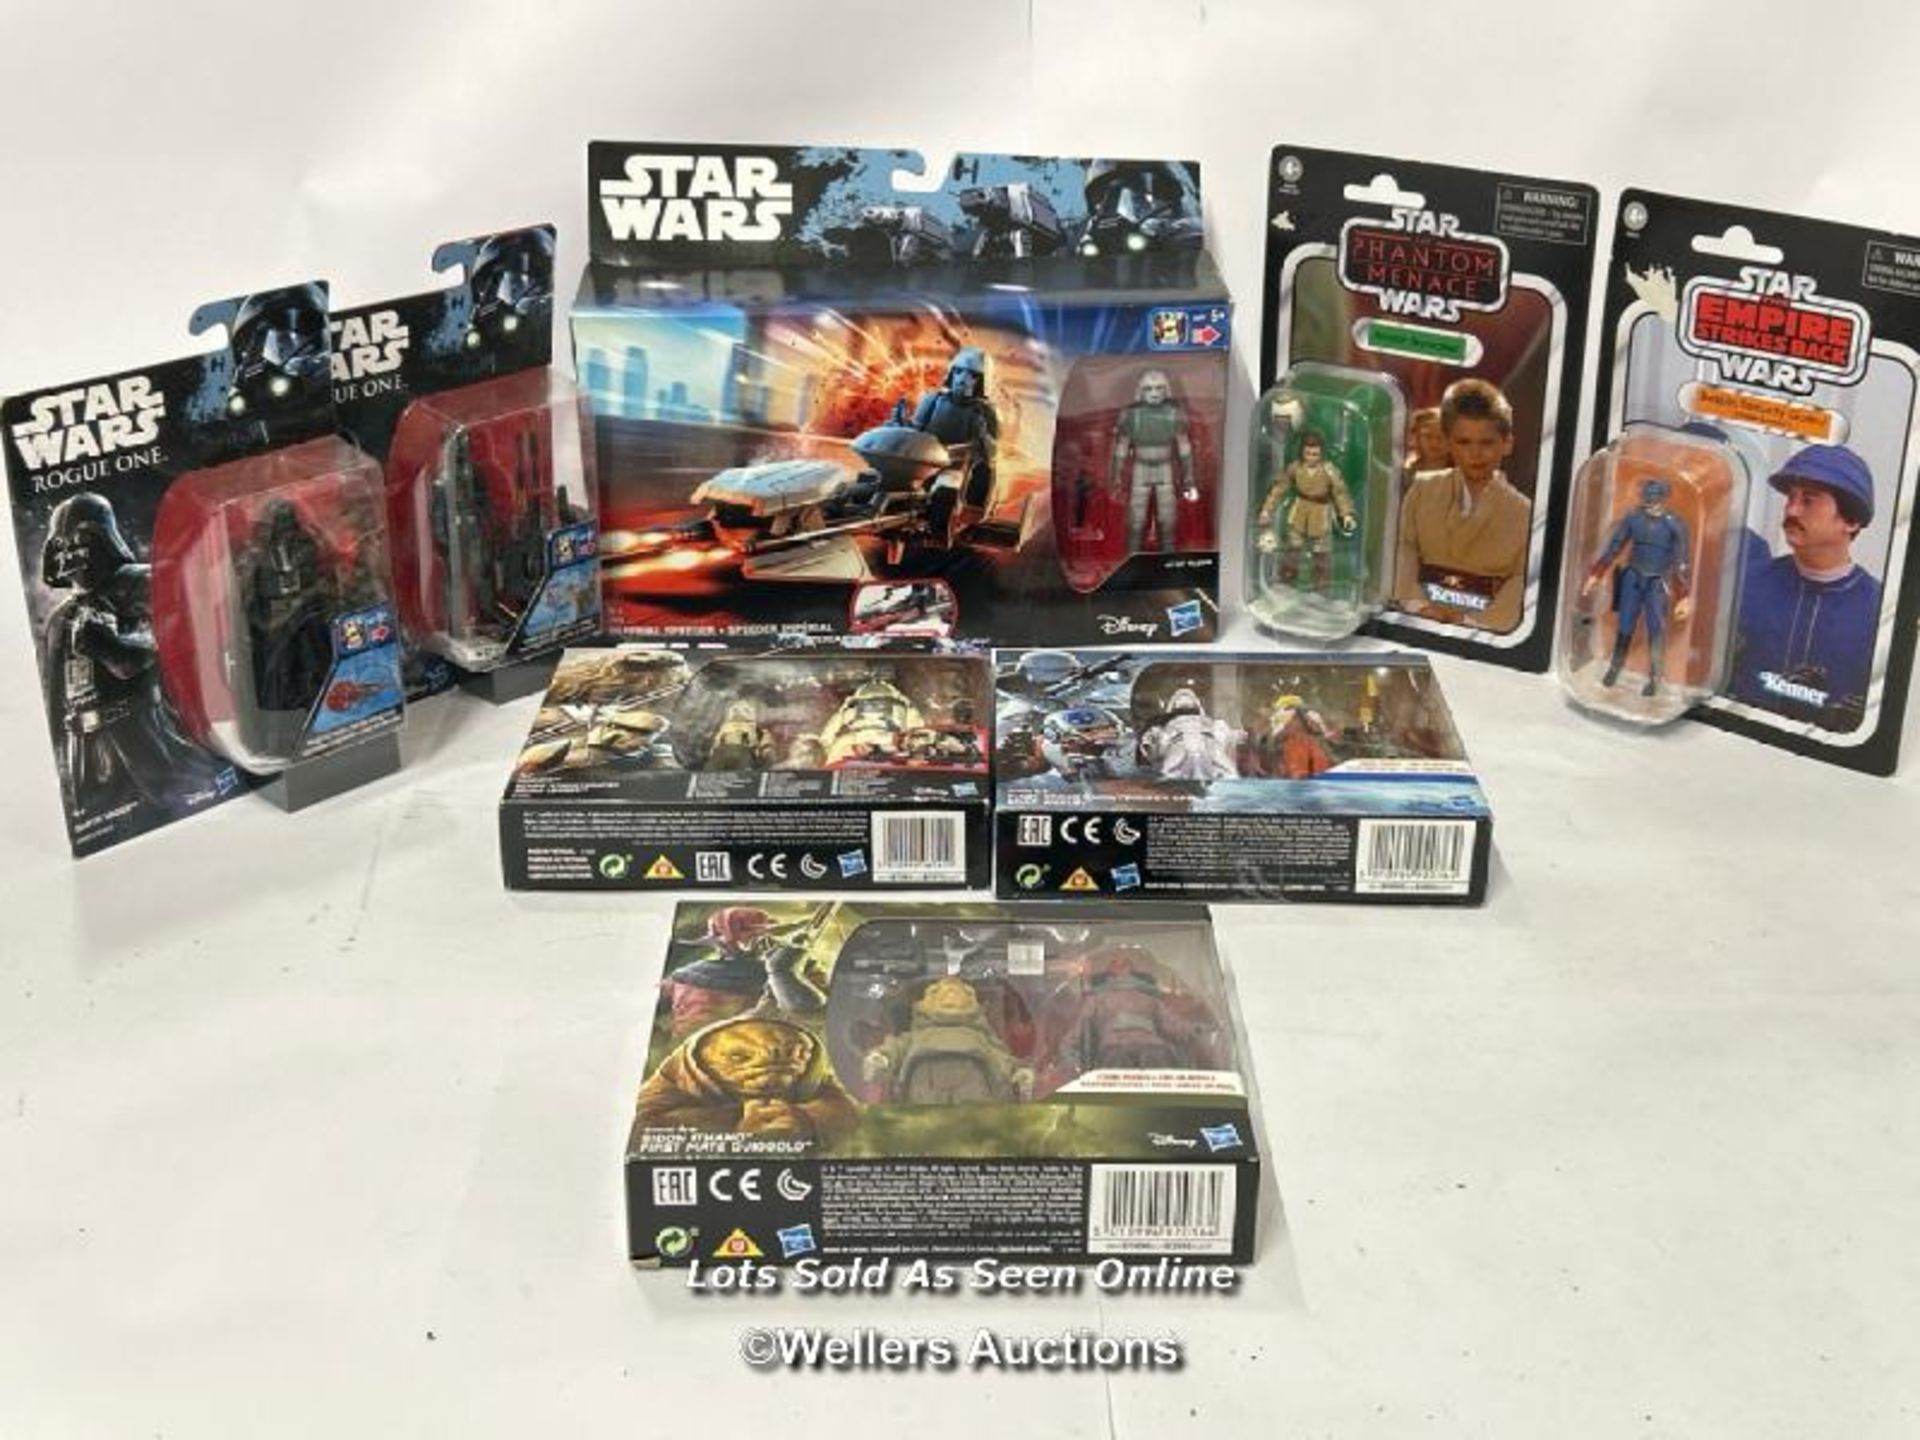 Boxed modern Star Wars toys including The Vintage Collection Anakin Skywalker & Besbin Security